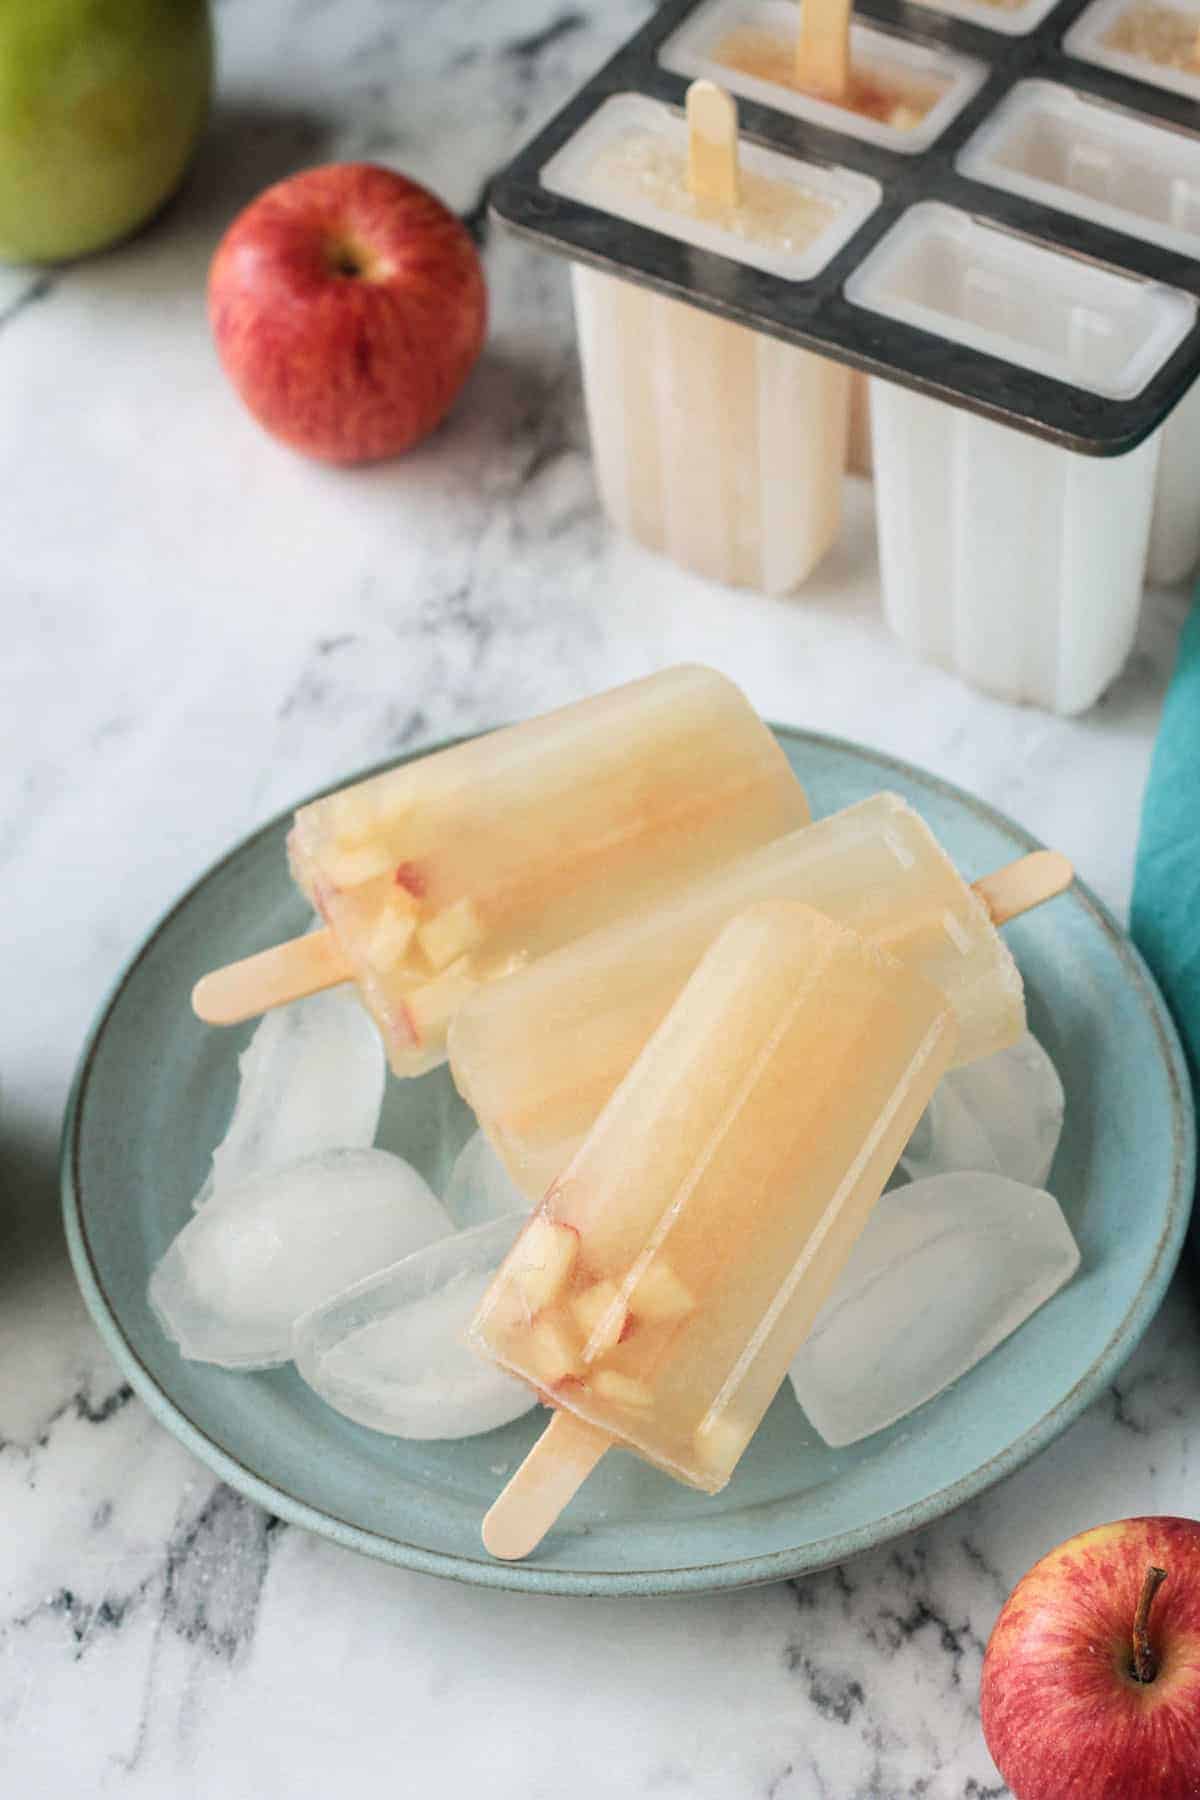 Three apple popsicles lying on ice cubes on a blue plate.